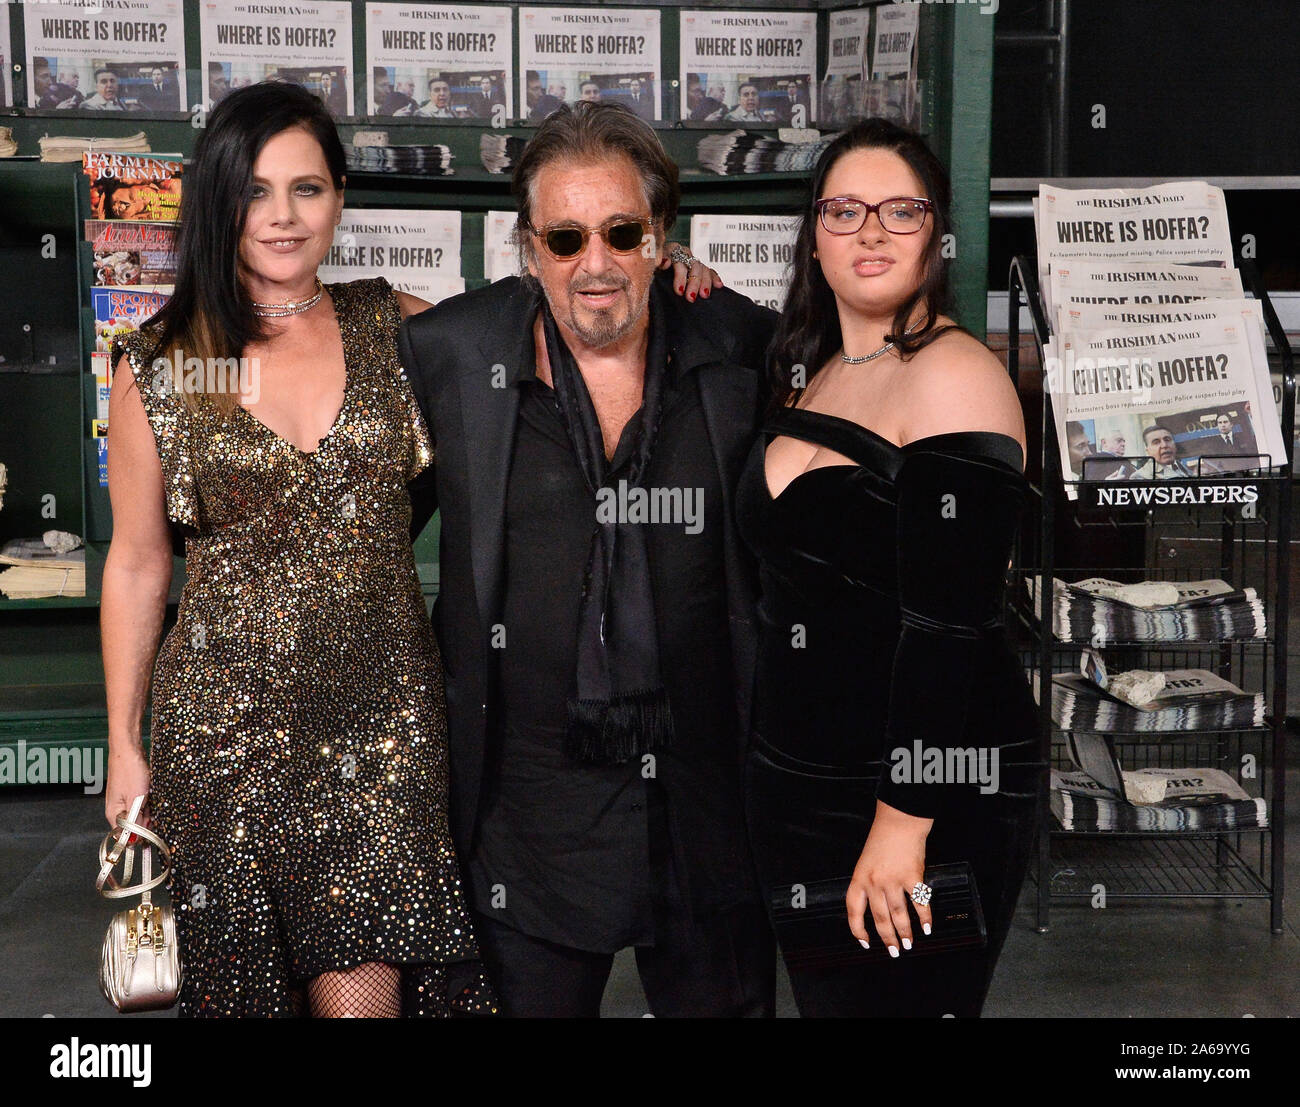 Los Angeles, United States. 24th Oct, 2019. Cast member Al Pacino and Israeli actress Meital Dohan and his daughter Olivia Pacino (R) attend the premiere of the historical crime thriller 'The Irishman' at the TCL Chinese Theatre in the Hollywood section of Los Angeles on Thursday, October 24, 2019. Storyline: Frank 'The Irishman' Sheeran is a man with a lot on his mind. The former labor union high official and hitman, learned to kill serving in Italy during the Second World War. Credit: UPI/Alamy Live News Stock Photo